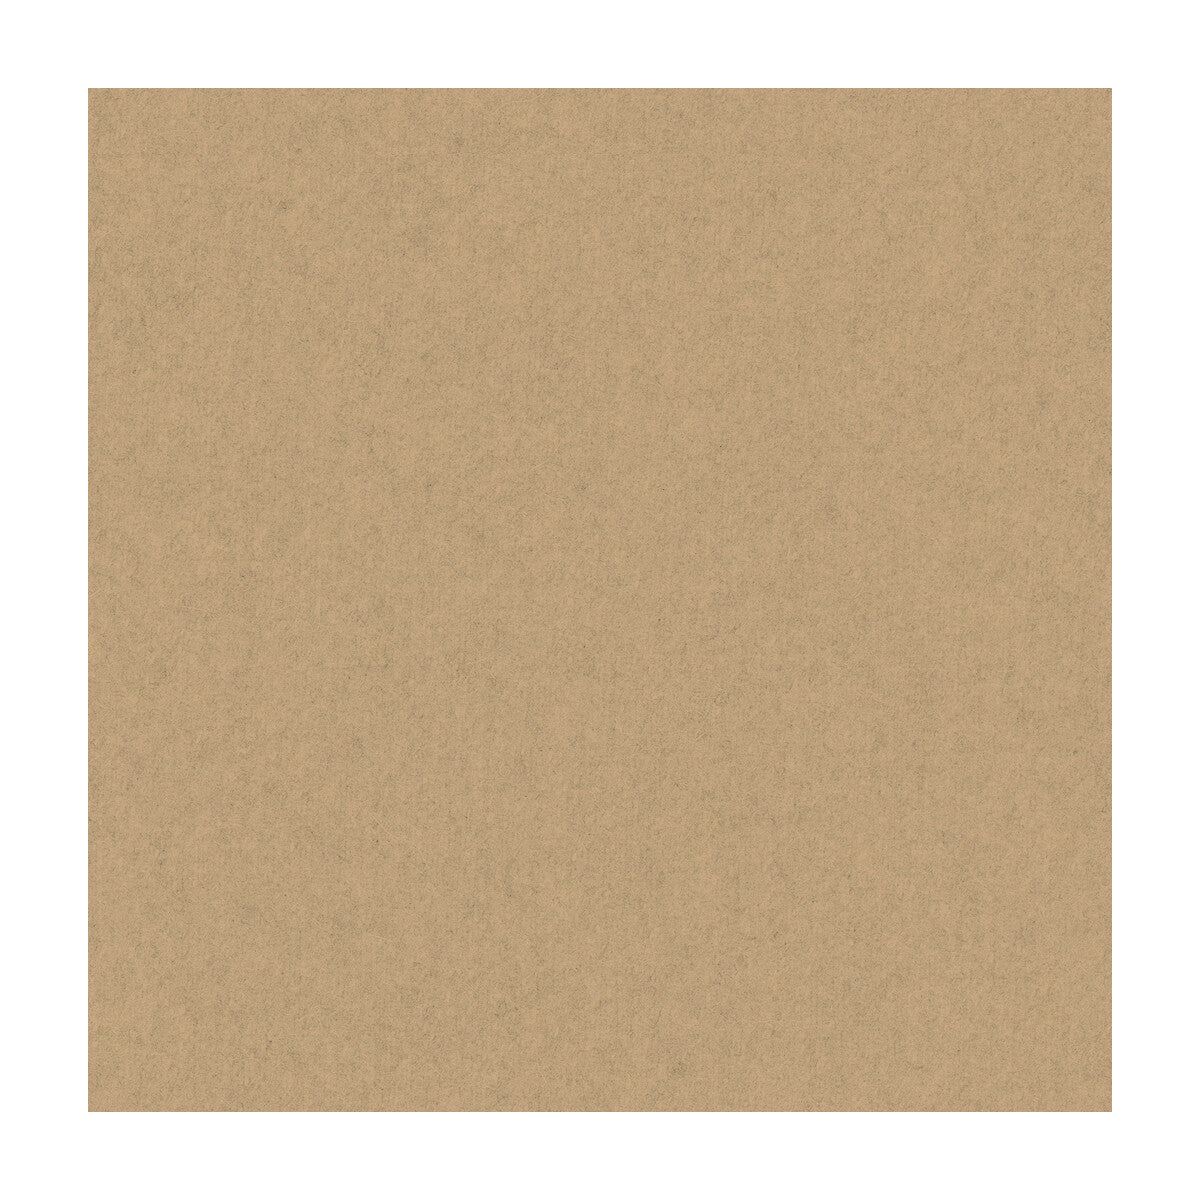 Jefferson Wool fabric in toast color - pattern 34397.16.0 - by Kravet Contract